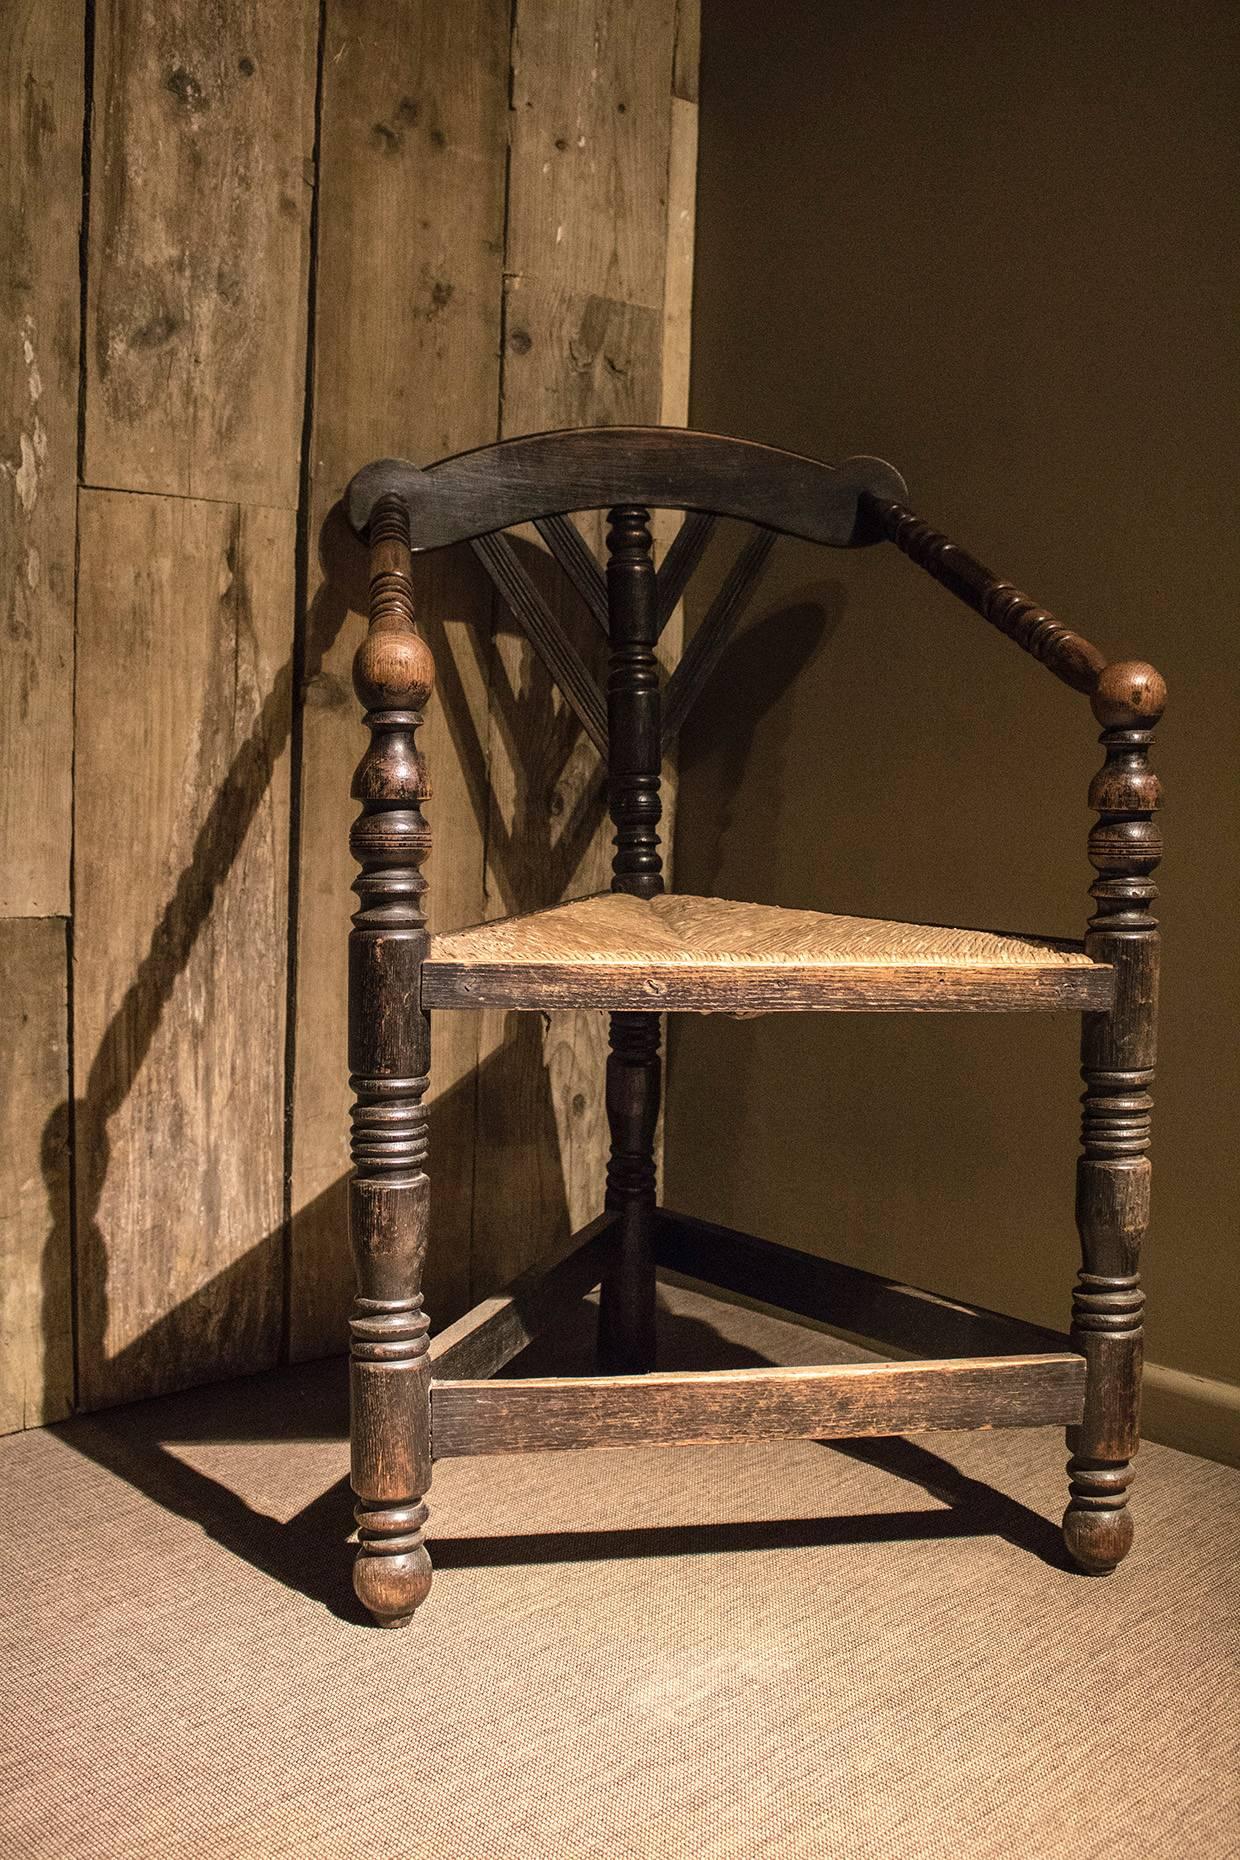 Lovely example with bobbin detailing and rush seat, circa late 19th century, great decorative order.